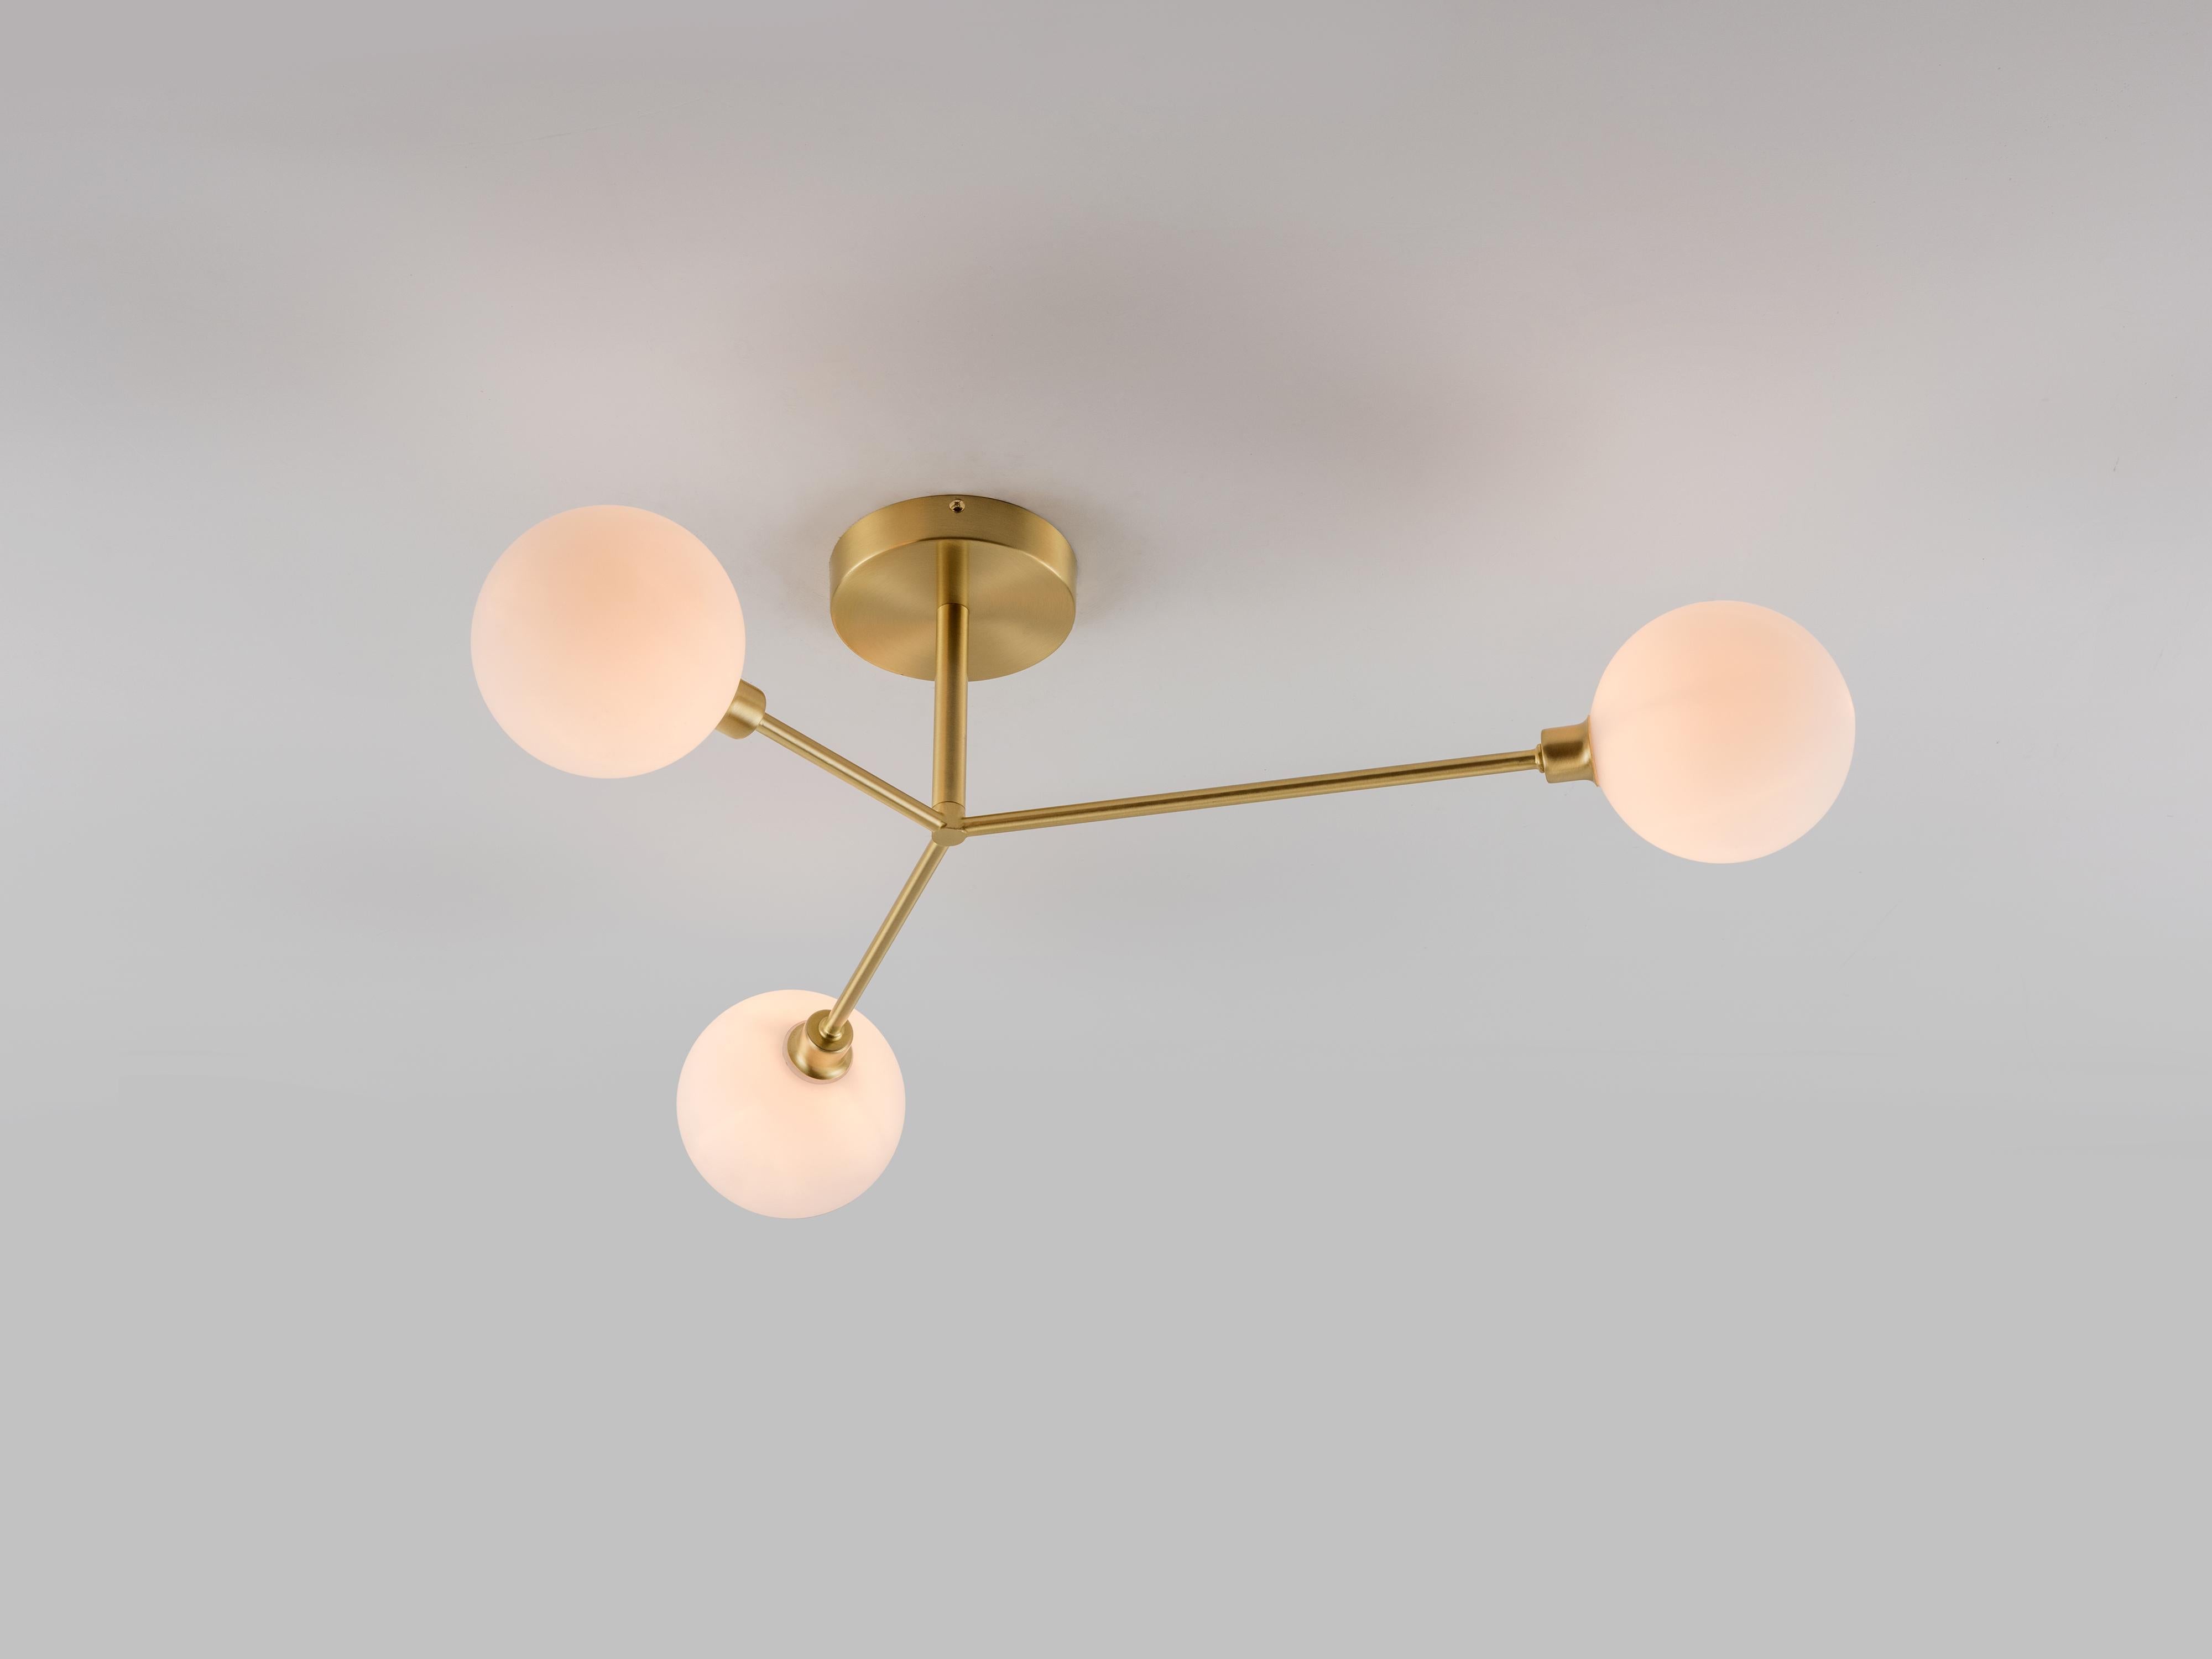 House of Brass 3 Light Flush Ceiling Light with Metal and Glass Shades In New Condition For Sale In Bradford on Avon, GB